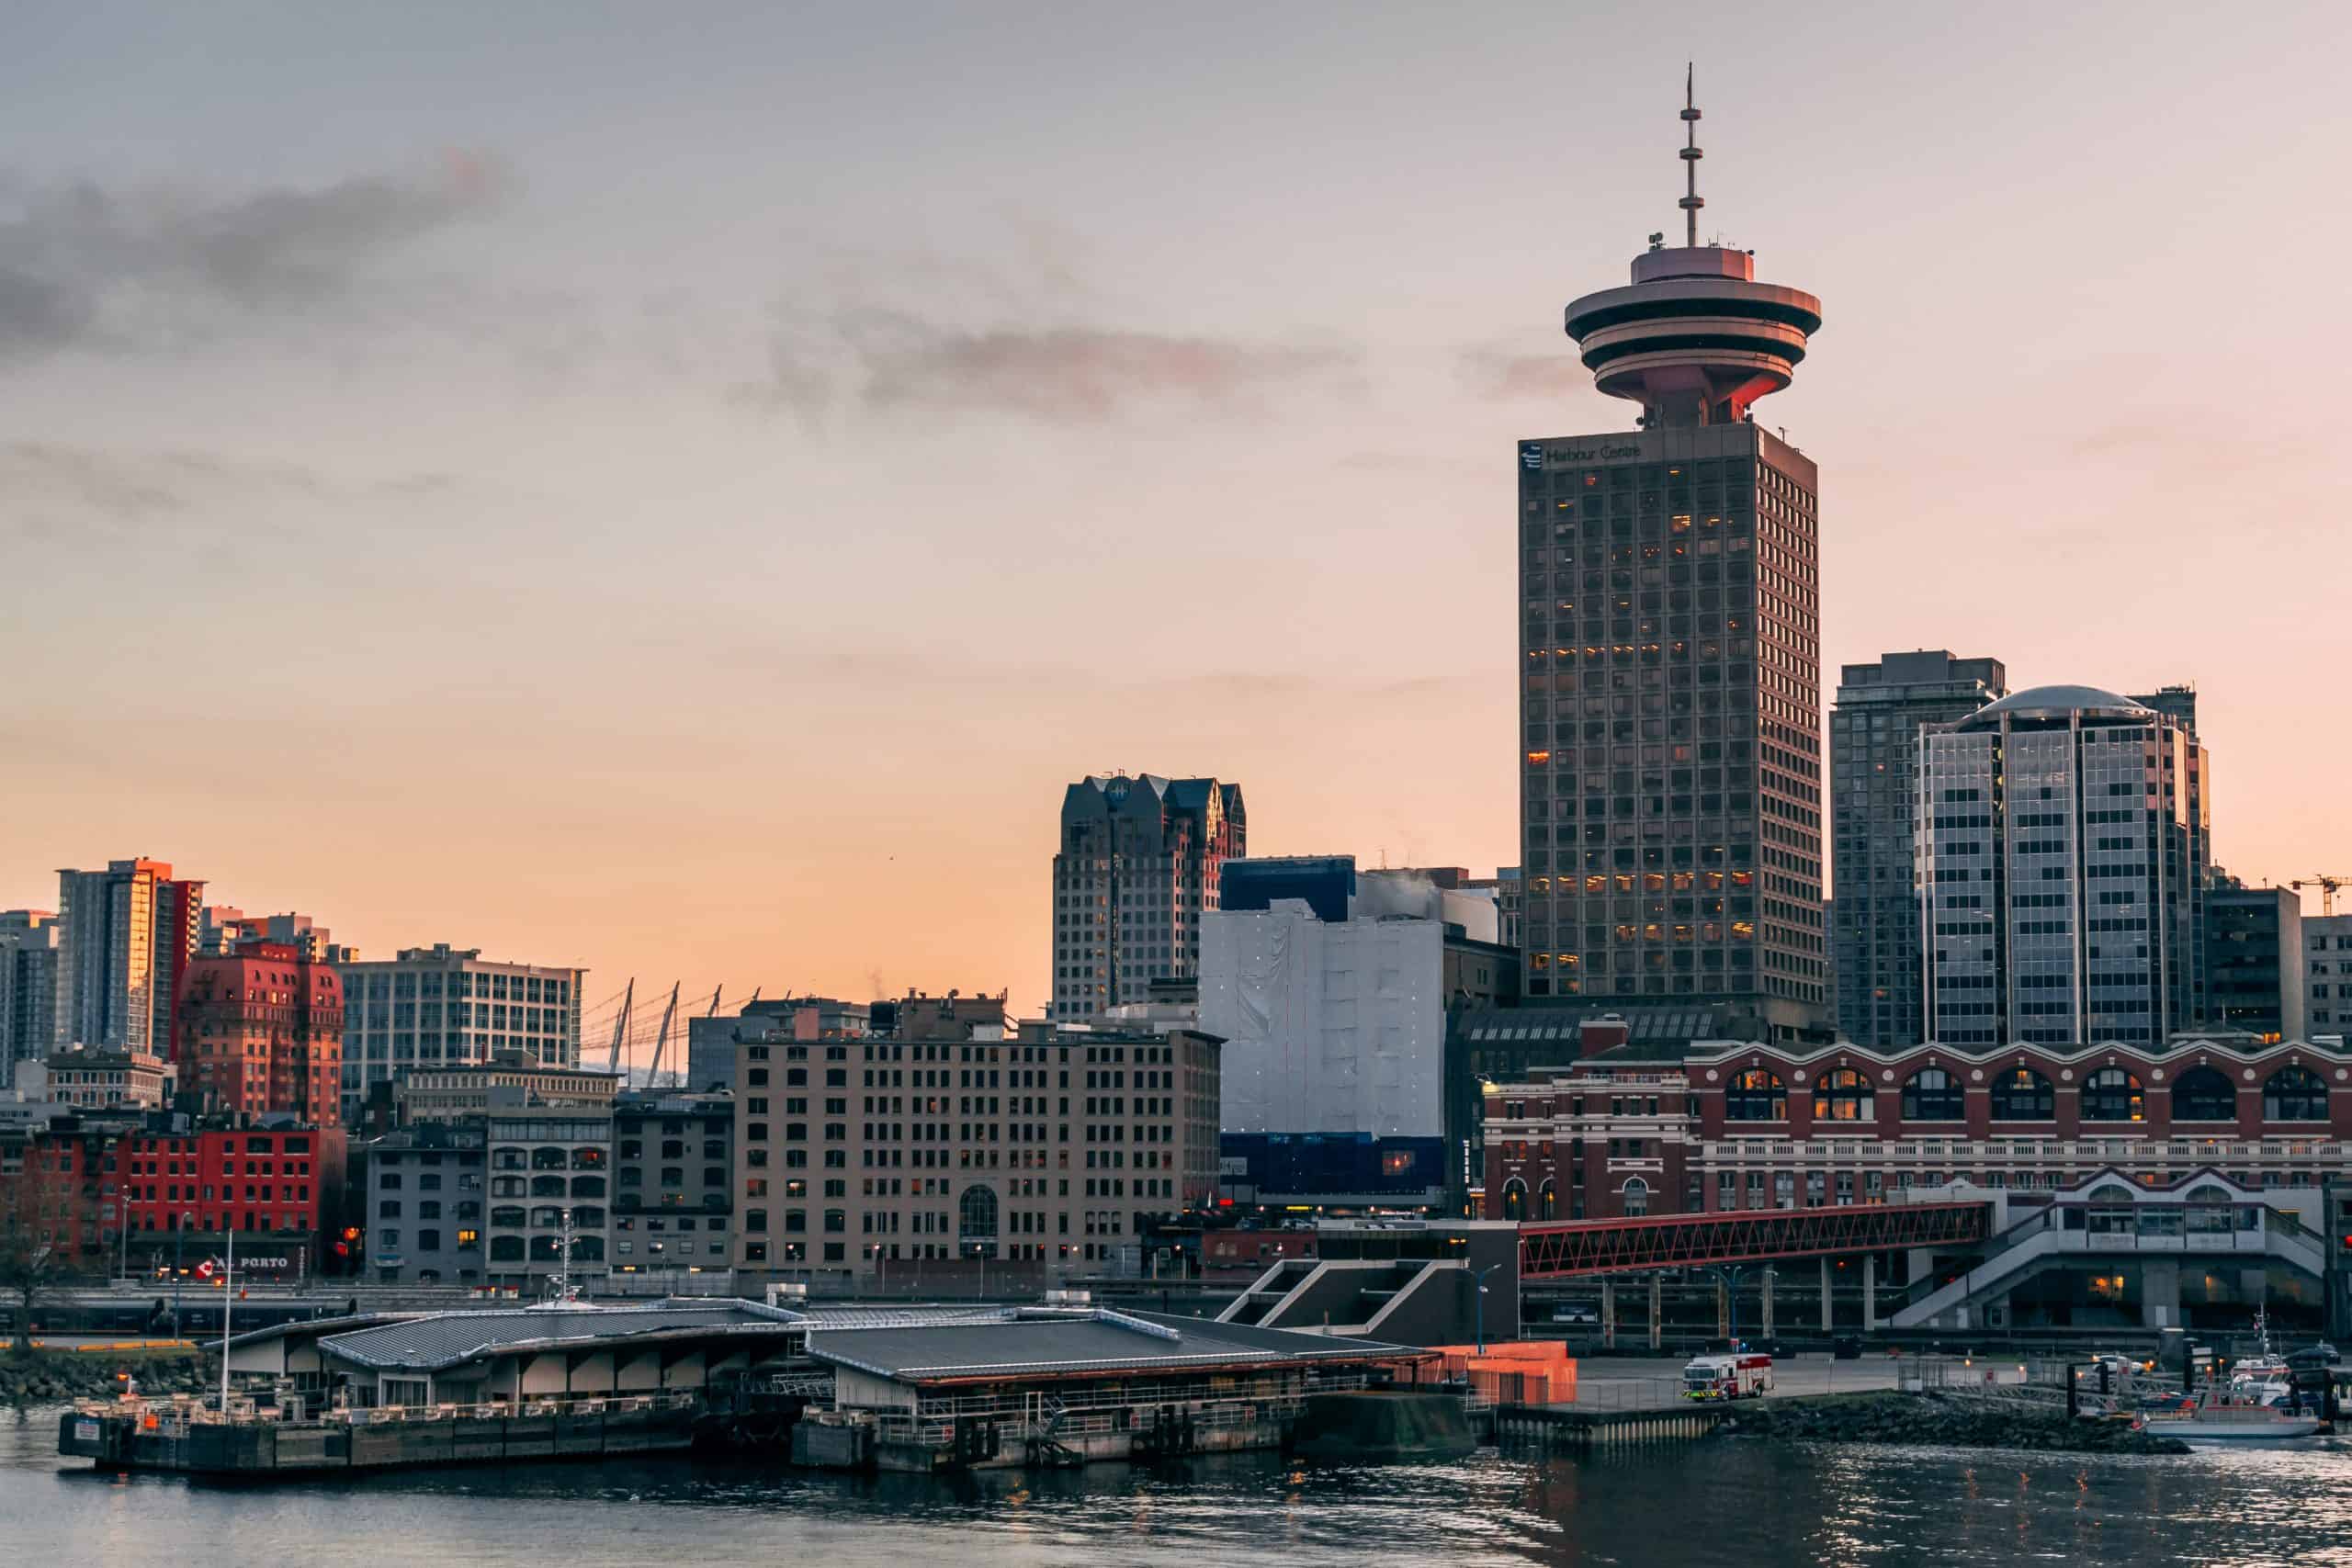 Vancouver Tech Showcase takes a different approach to highlighting local ventures